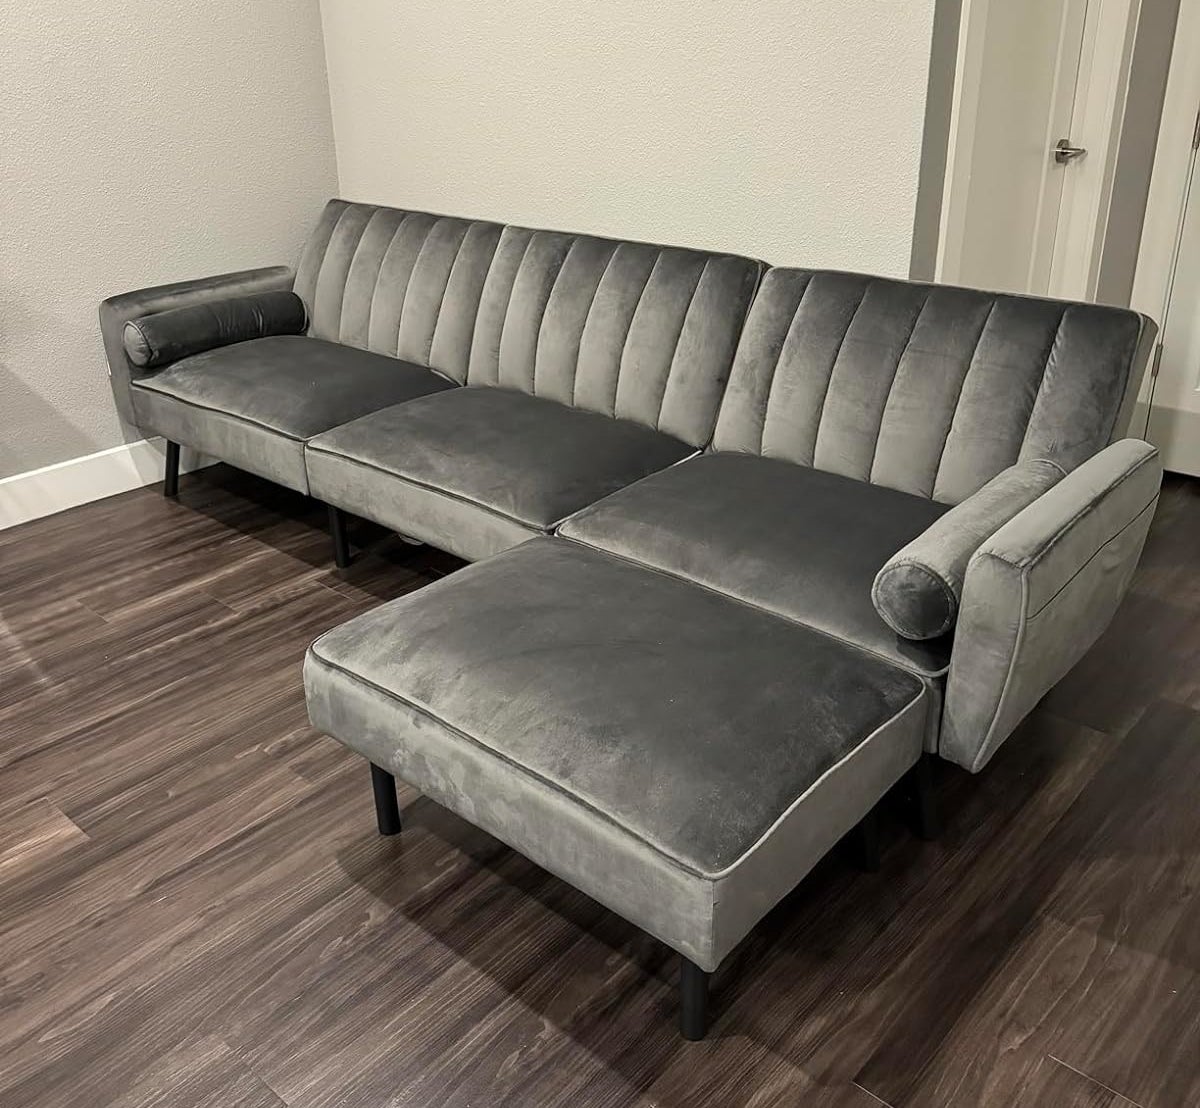 A silver-ish sofa sectional